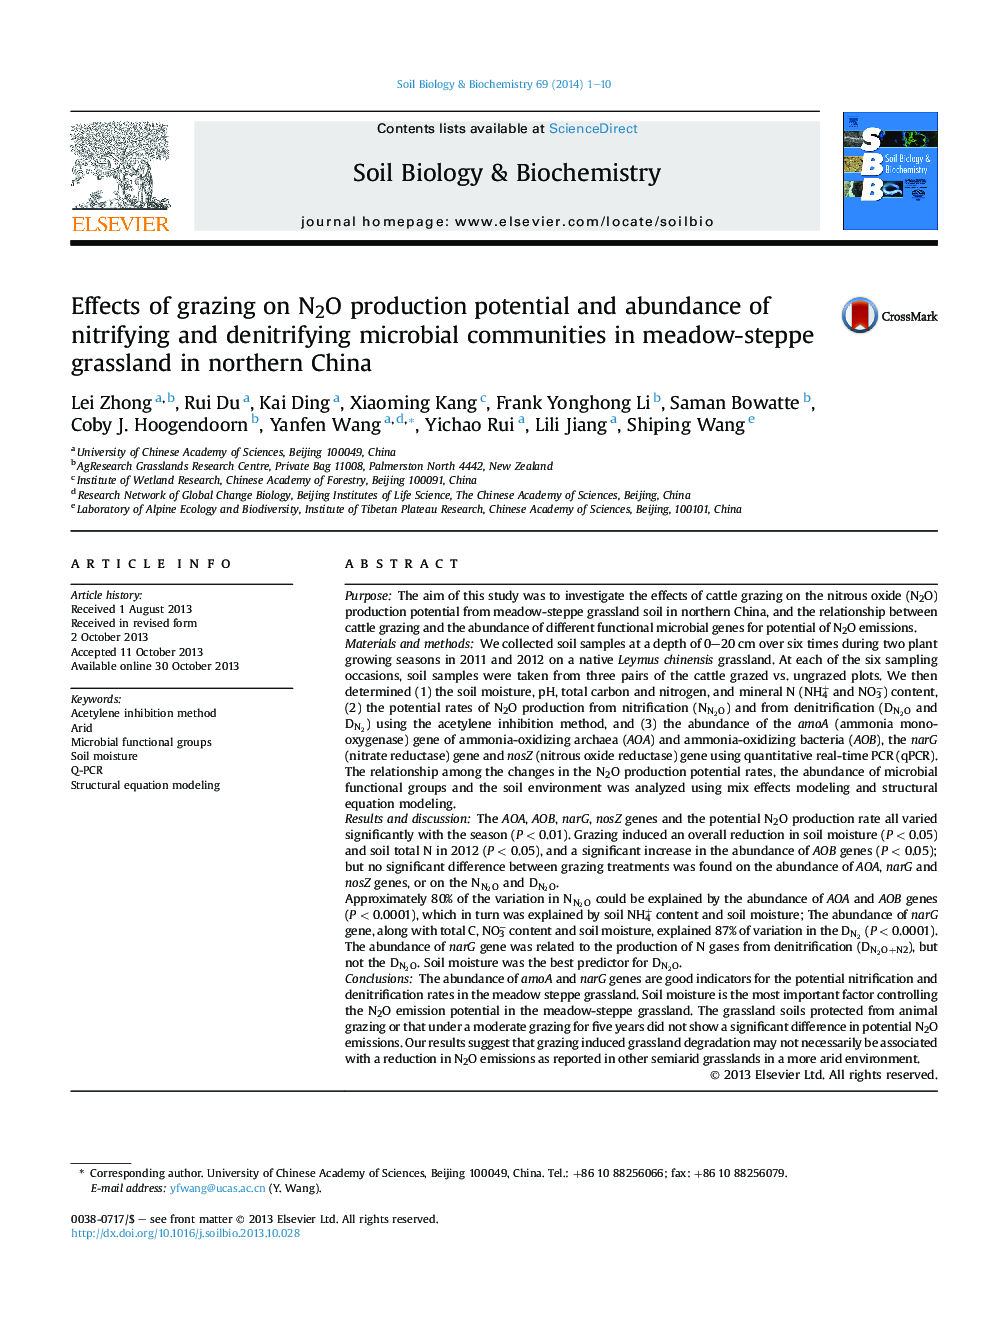 Effects of grazing on N2O production potential and abundance of nitrifying and denitrifying microbial communities in meadow-steppe grassland in northern China